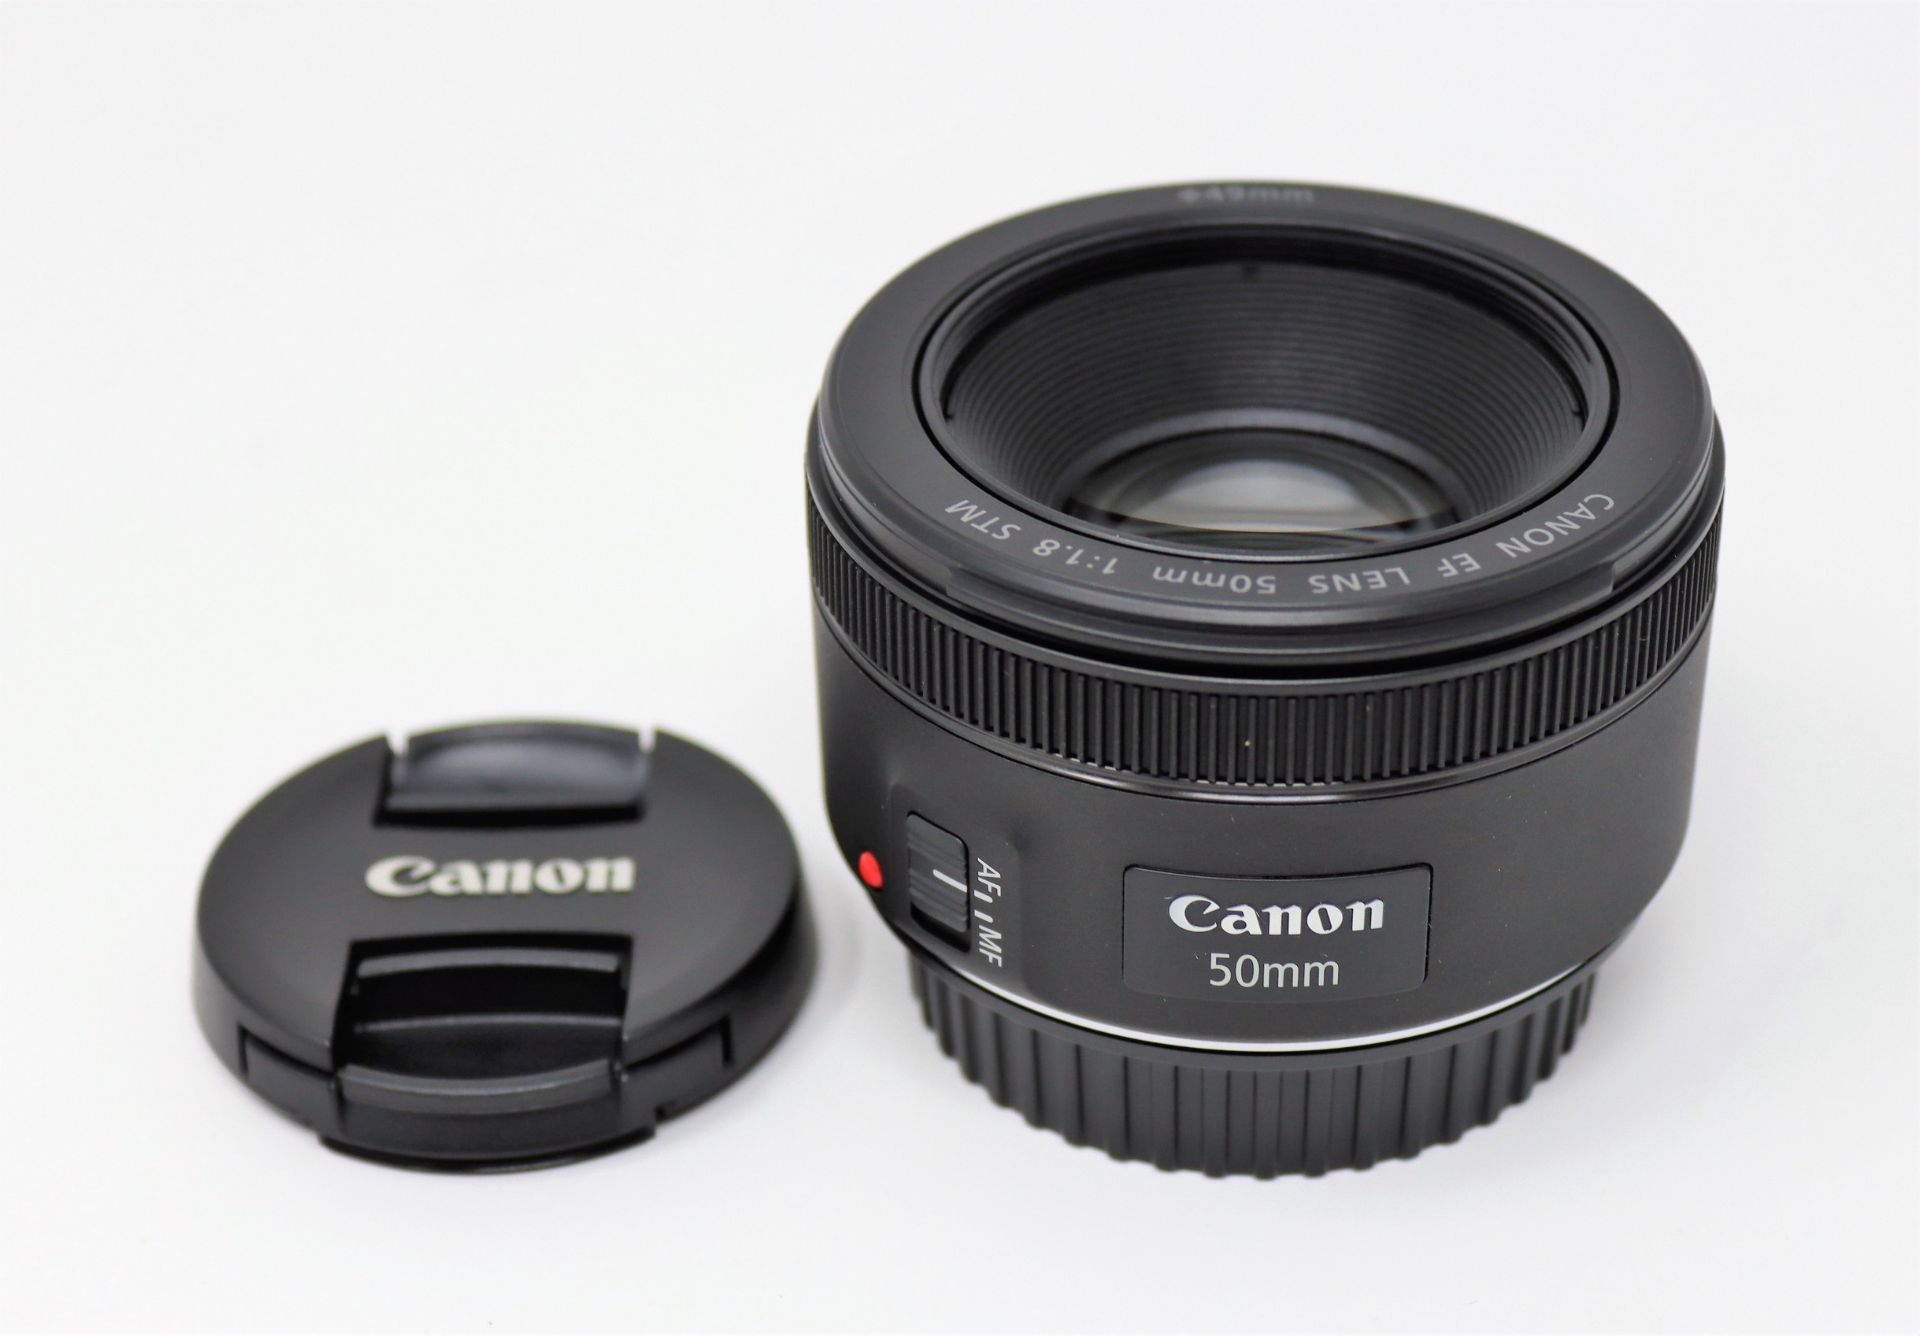 A boxed as new Canon EF 50mm f/1.8 STM lens.